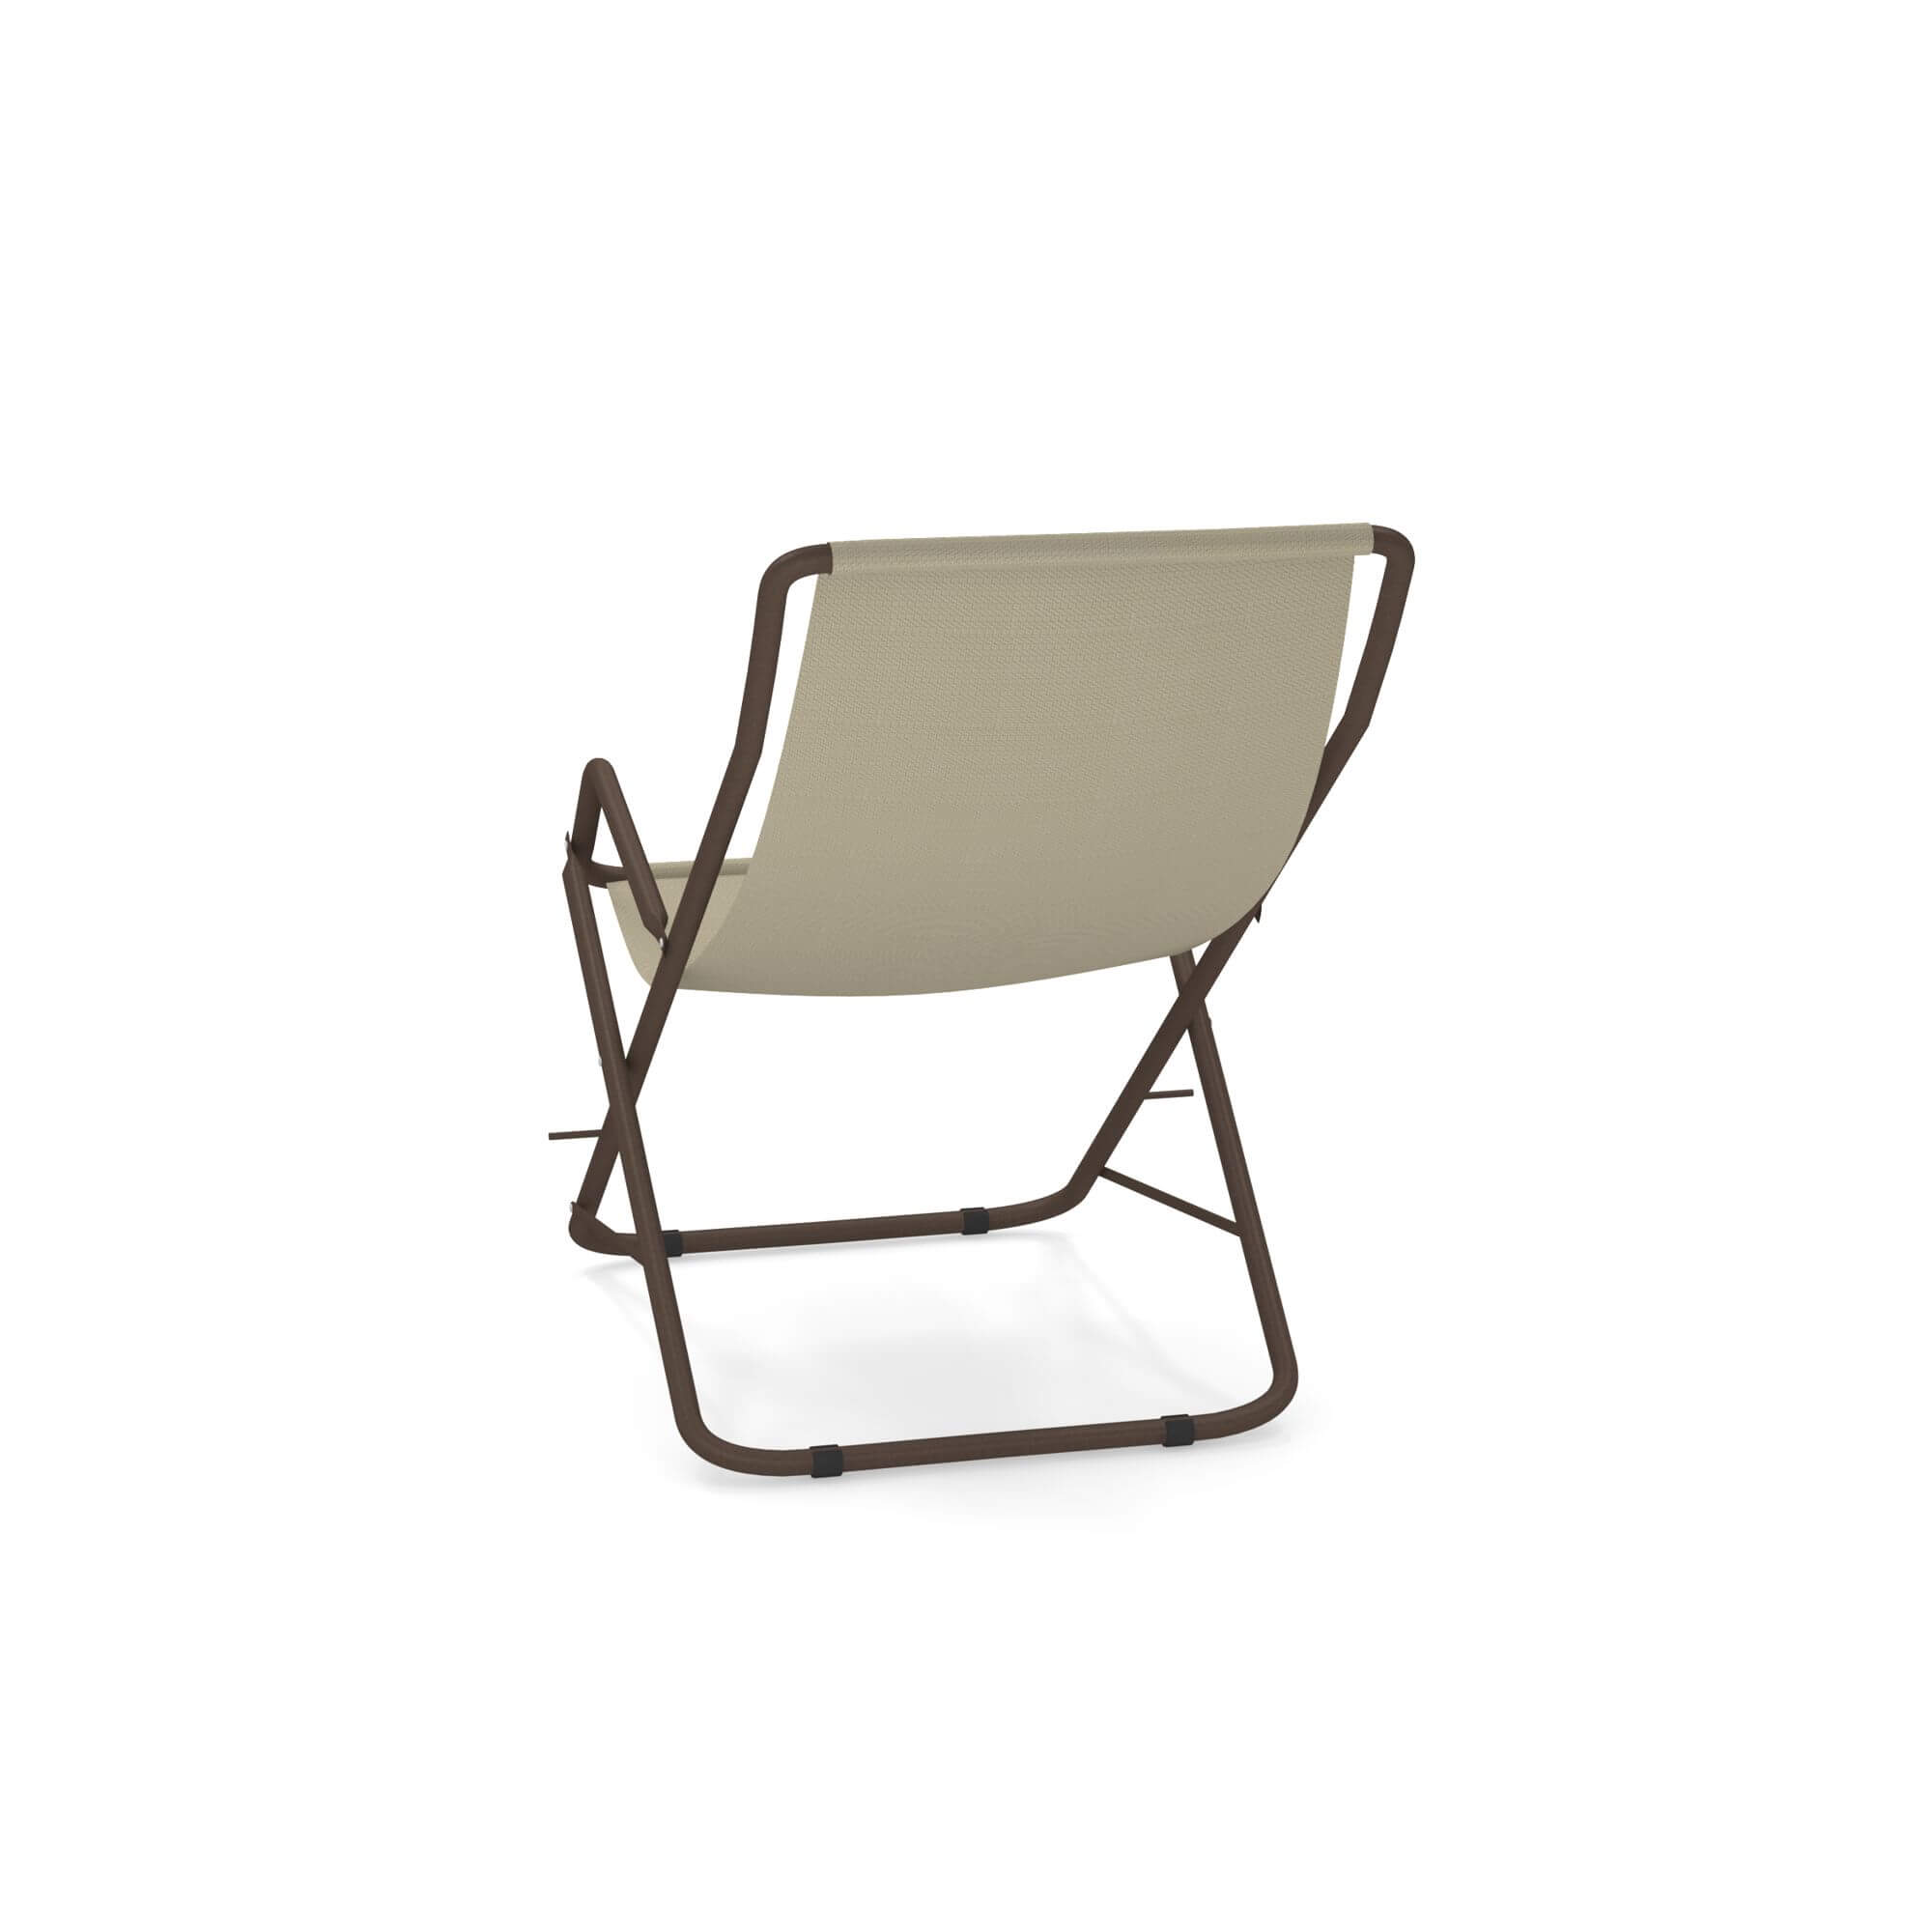 Garden deck chair / outside in Steel, emu-tex - Collection Bahama